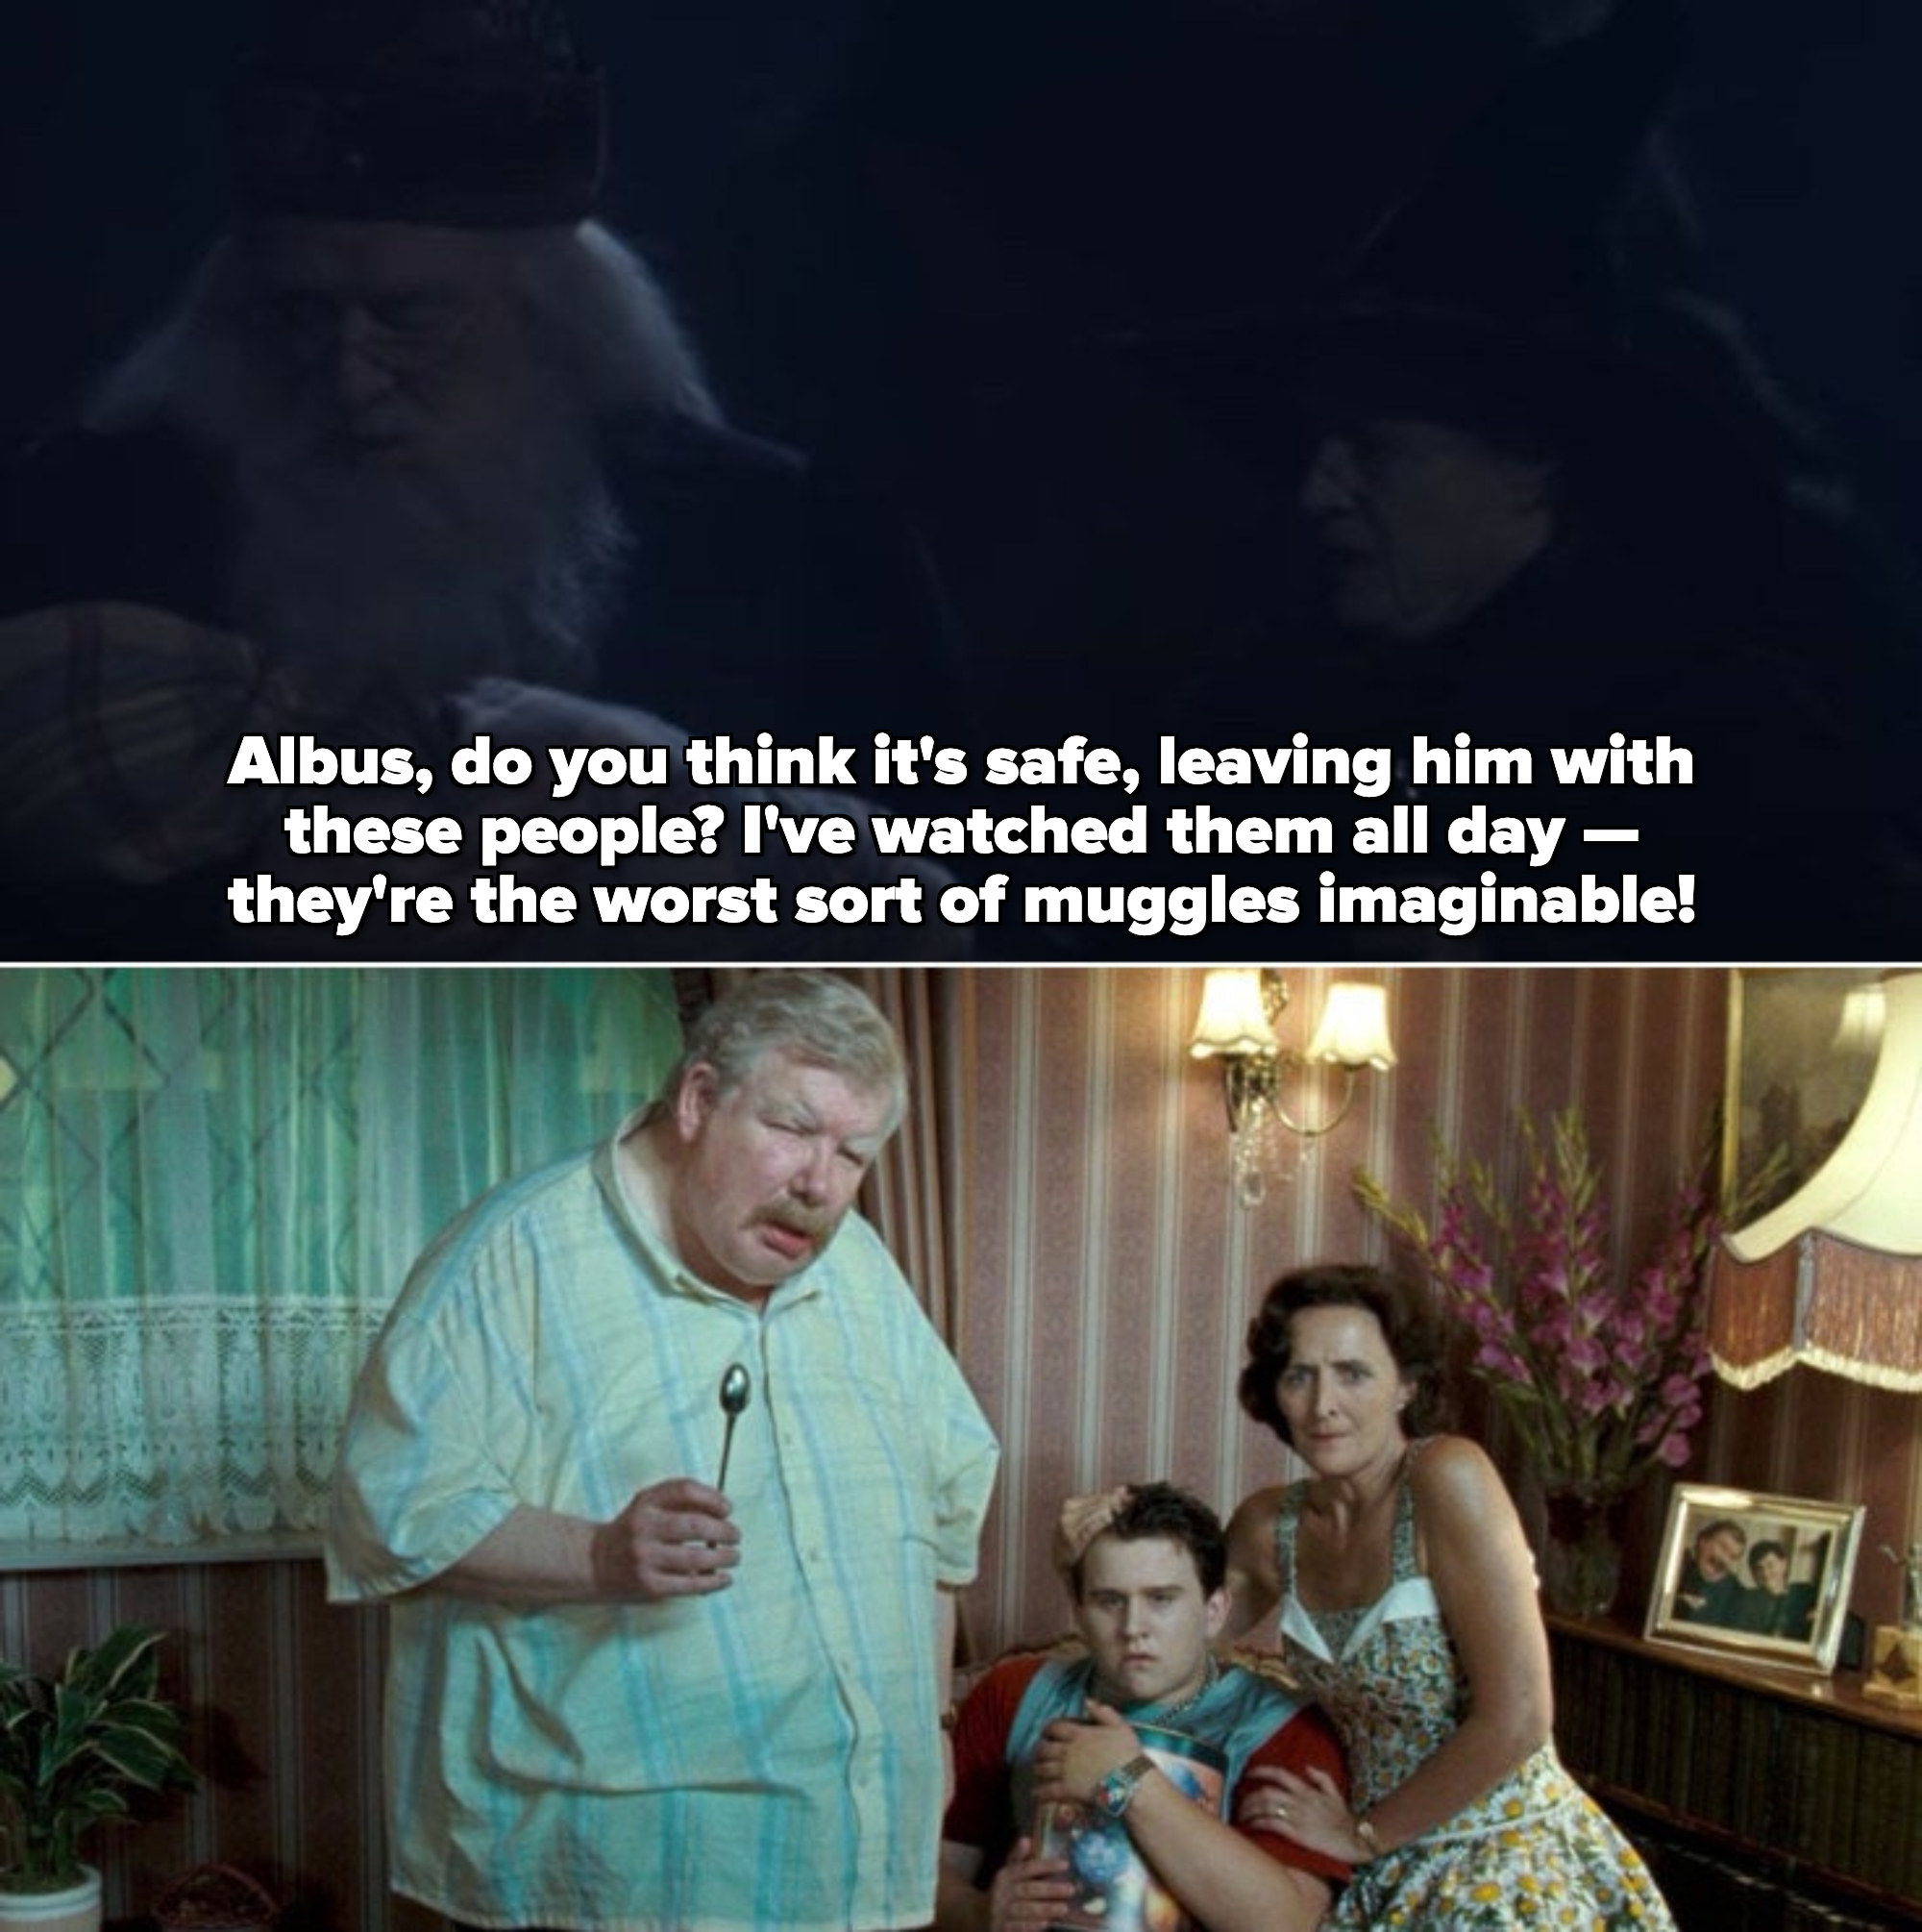 Dumbledore holding baby Harry while McGonagall questions leaving him to The Dursleys; The Dursleys staring at Harry with hate and cruelty, after Harry and Dudley ran into some bad wizards in the Muggle world